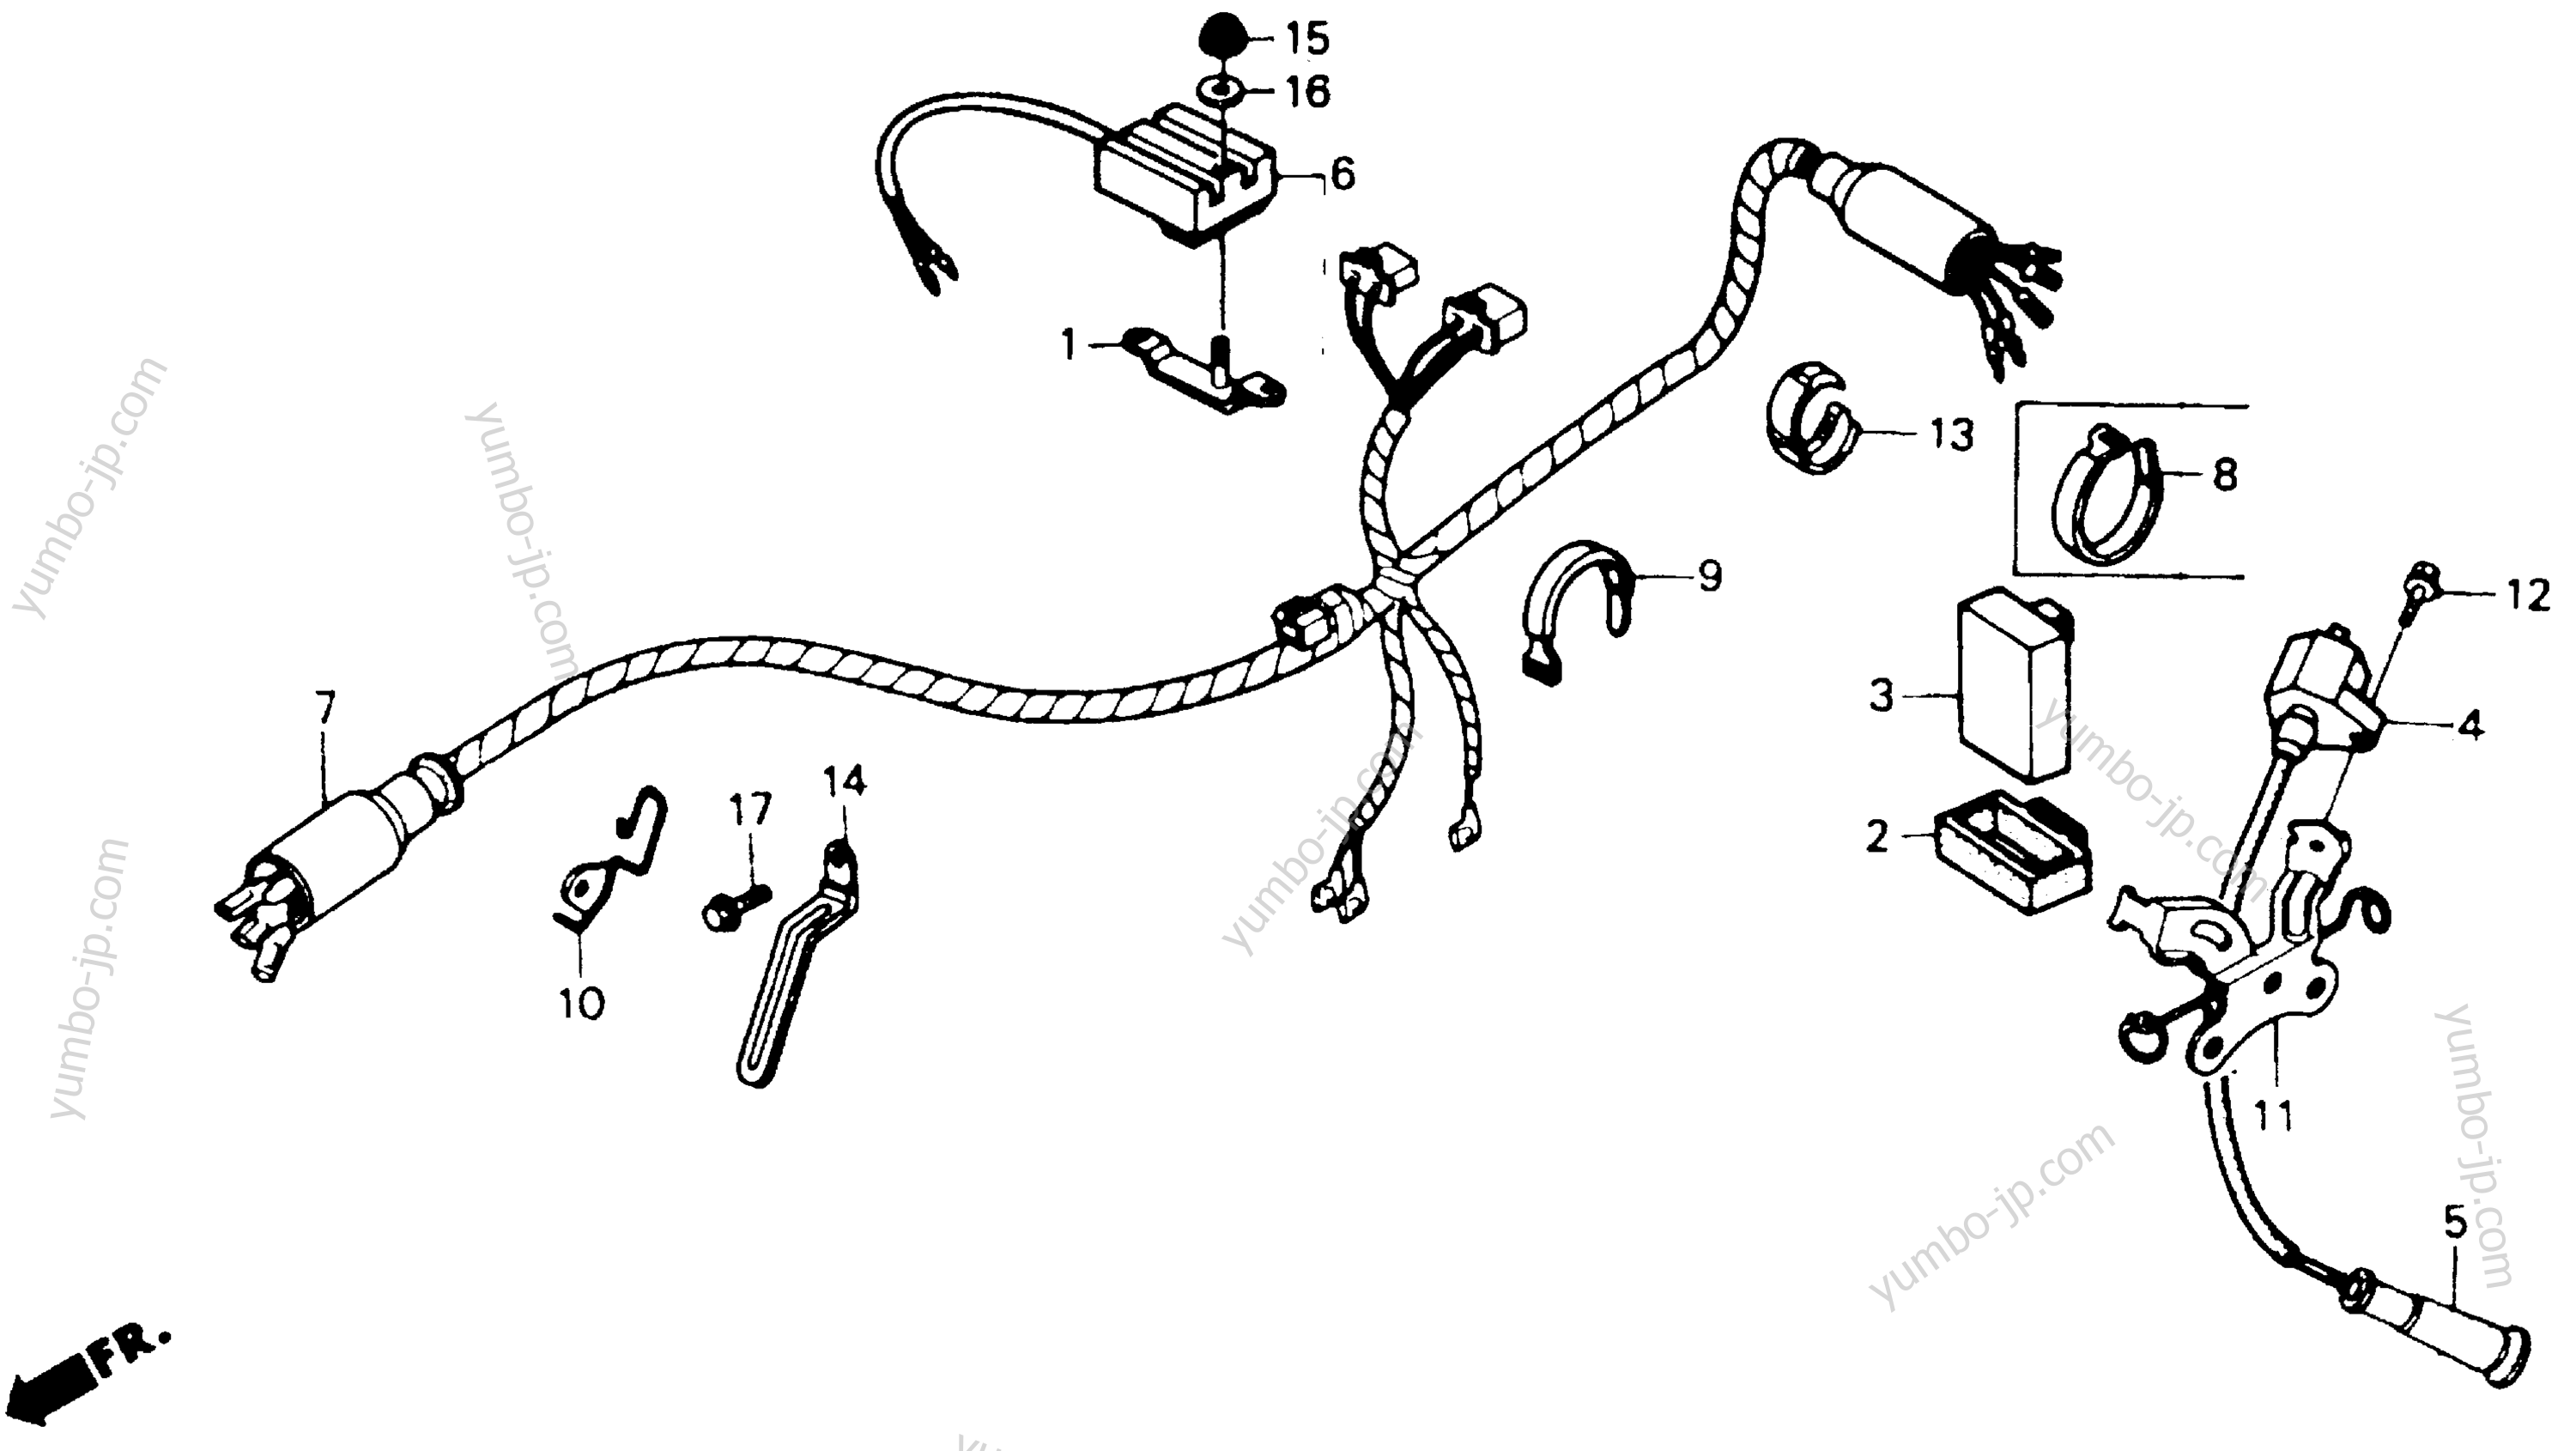 WIRE HARNESS for motorcycles HONDA XR600R A 1986 year